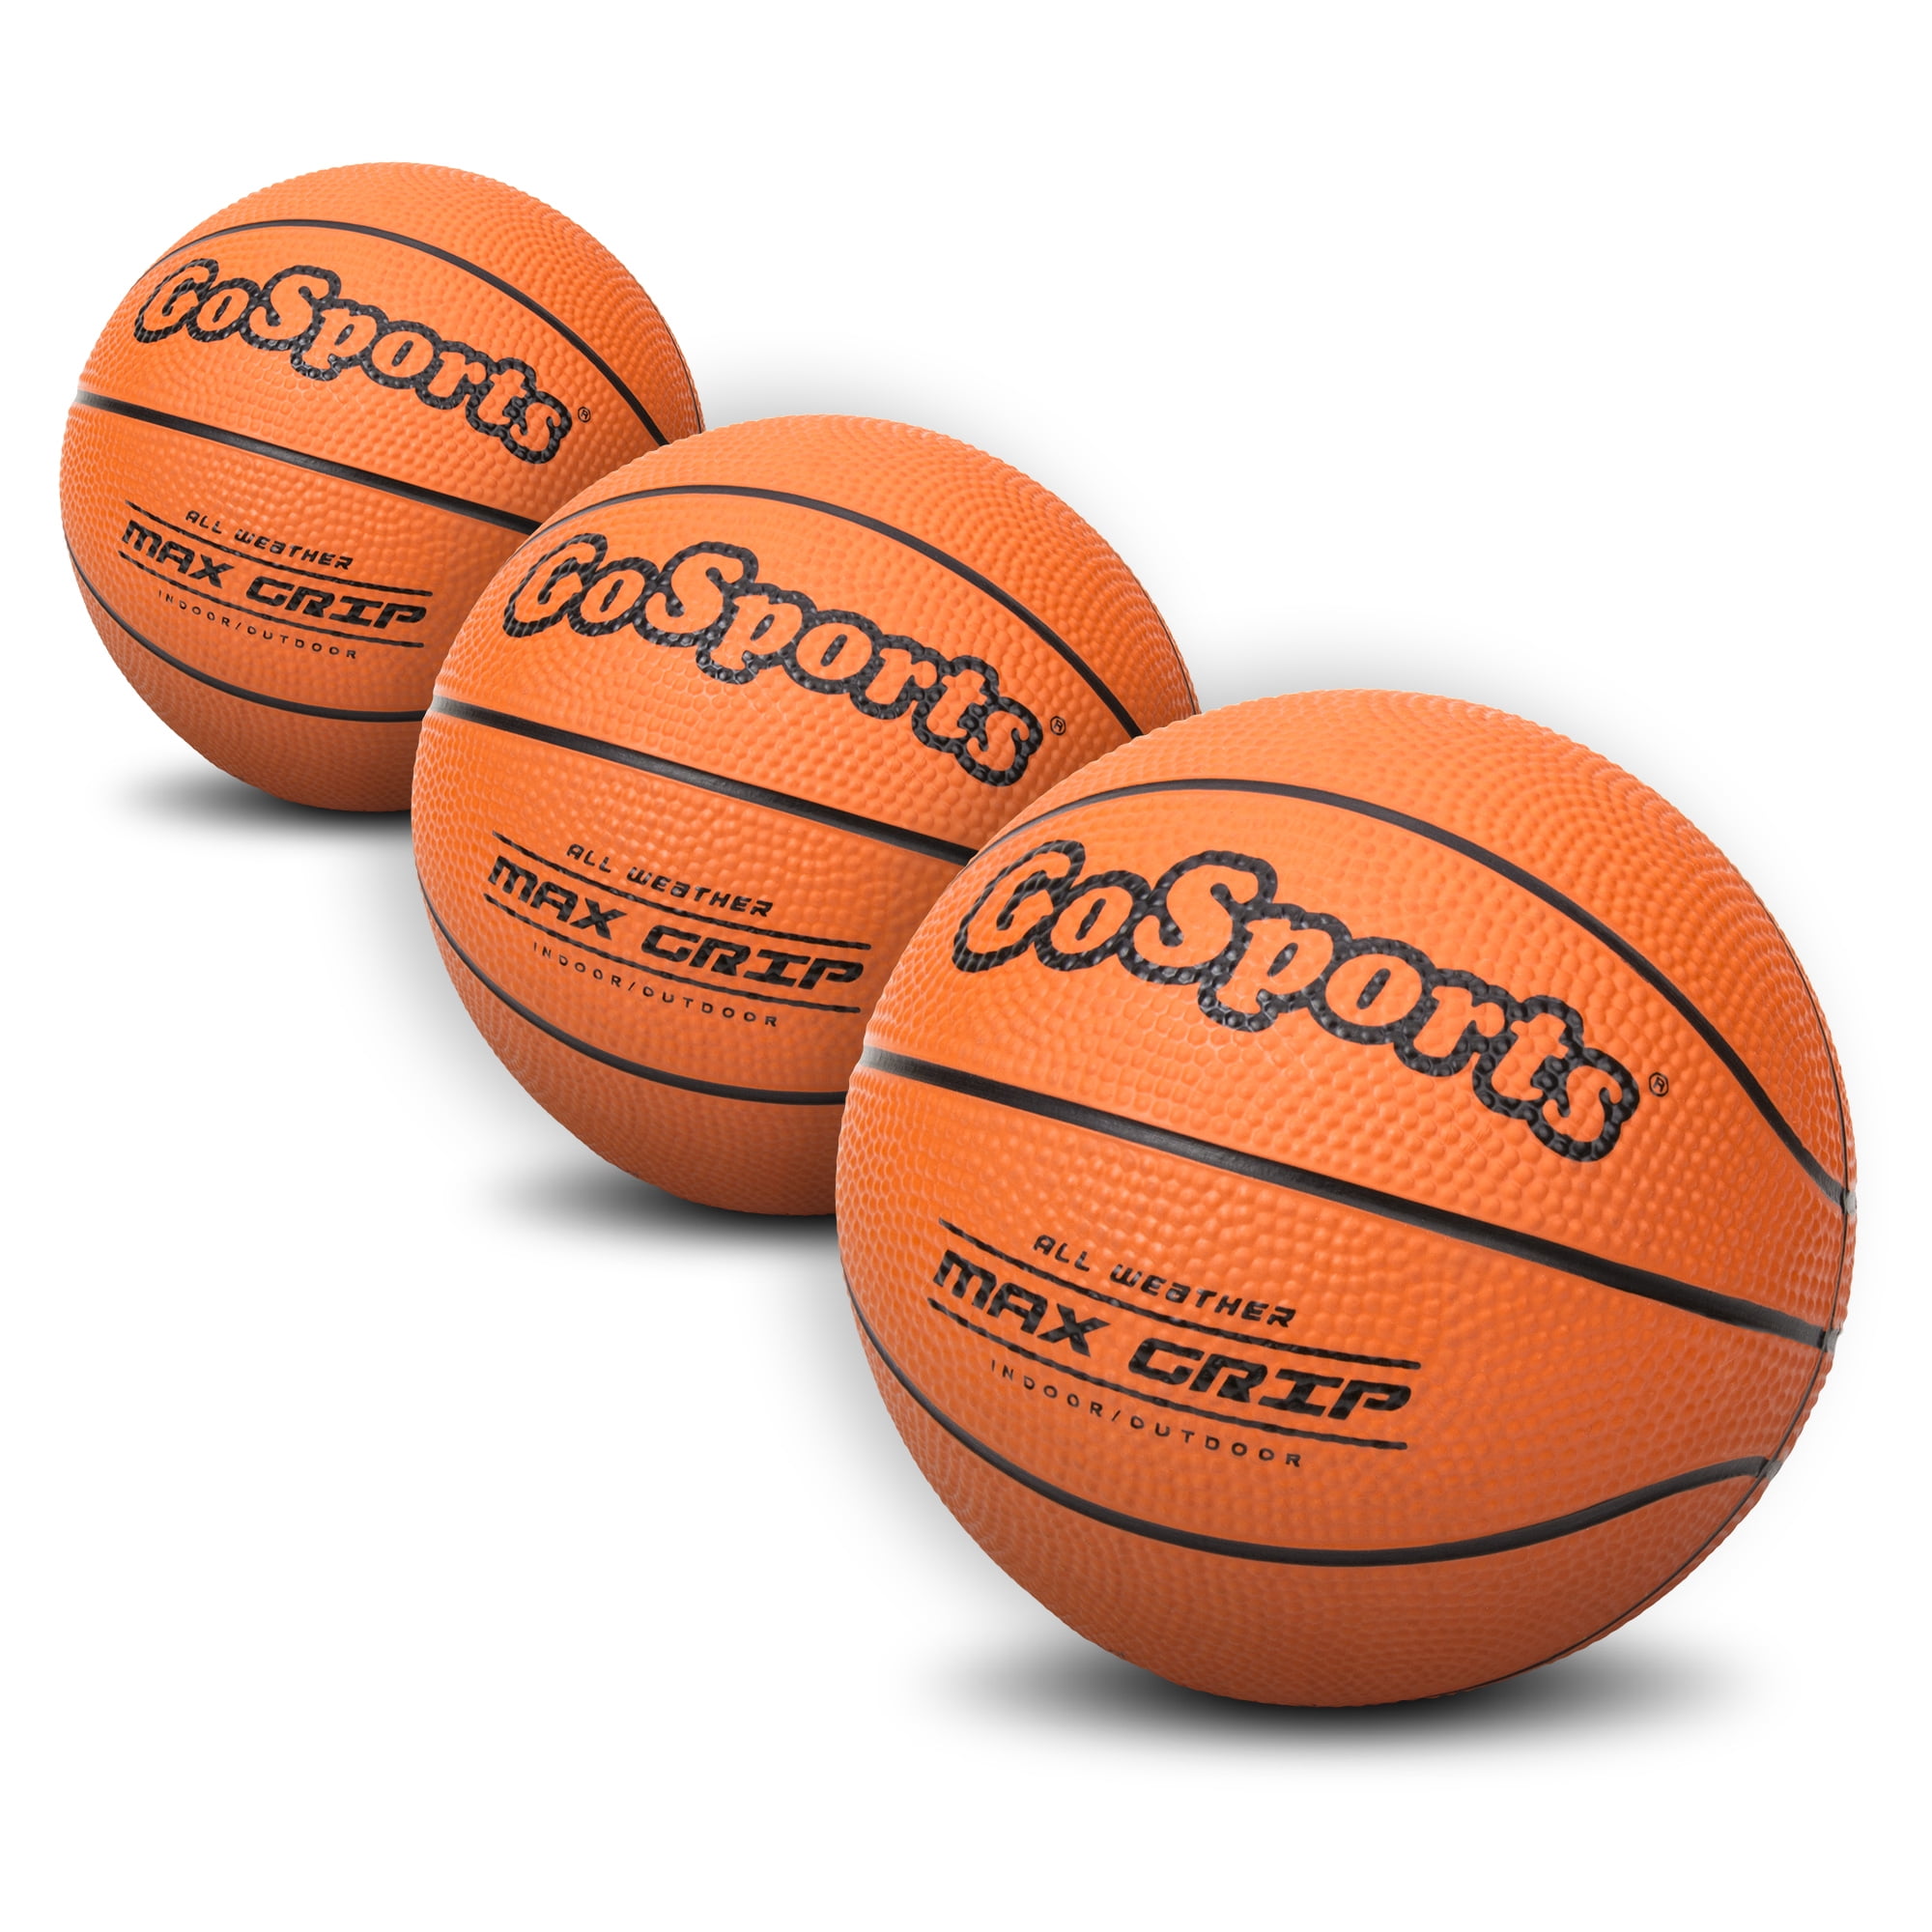 Details about   And1 3 pack mini basketball set for kids with pump youth size 3 easy grip In 